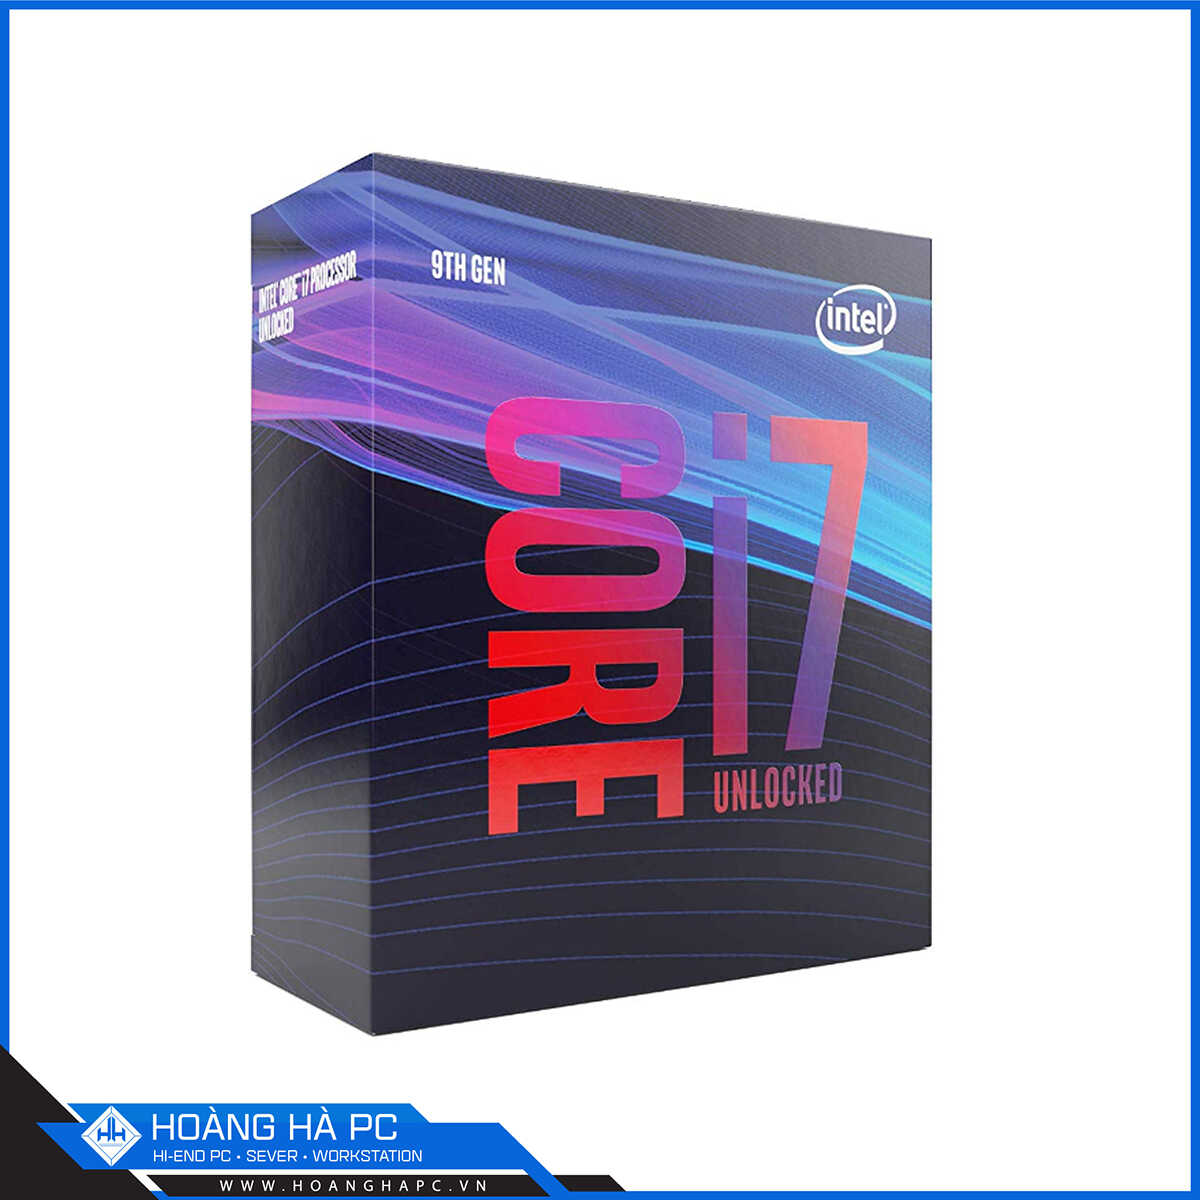 CPU Intel Core i7 9700KF (Up to 4.90Ghz, 12Mb Cache, Coffee Lake)